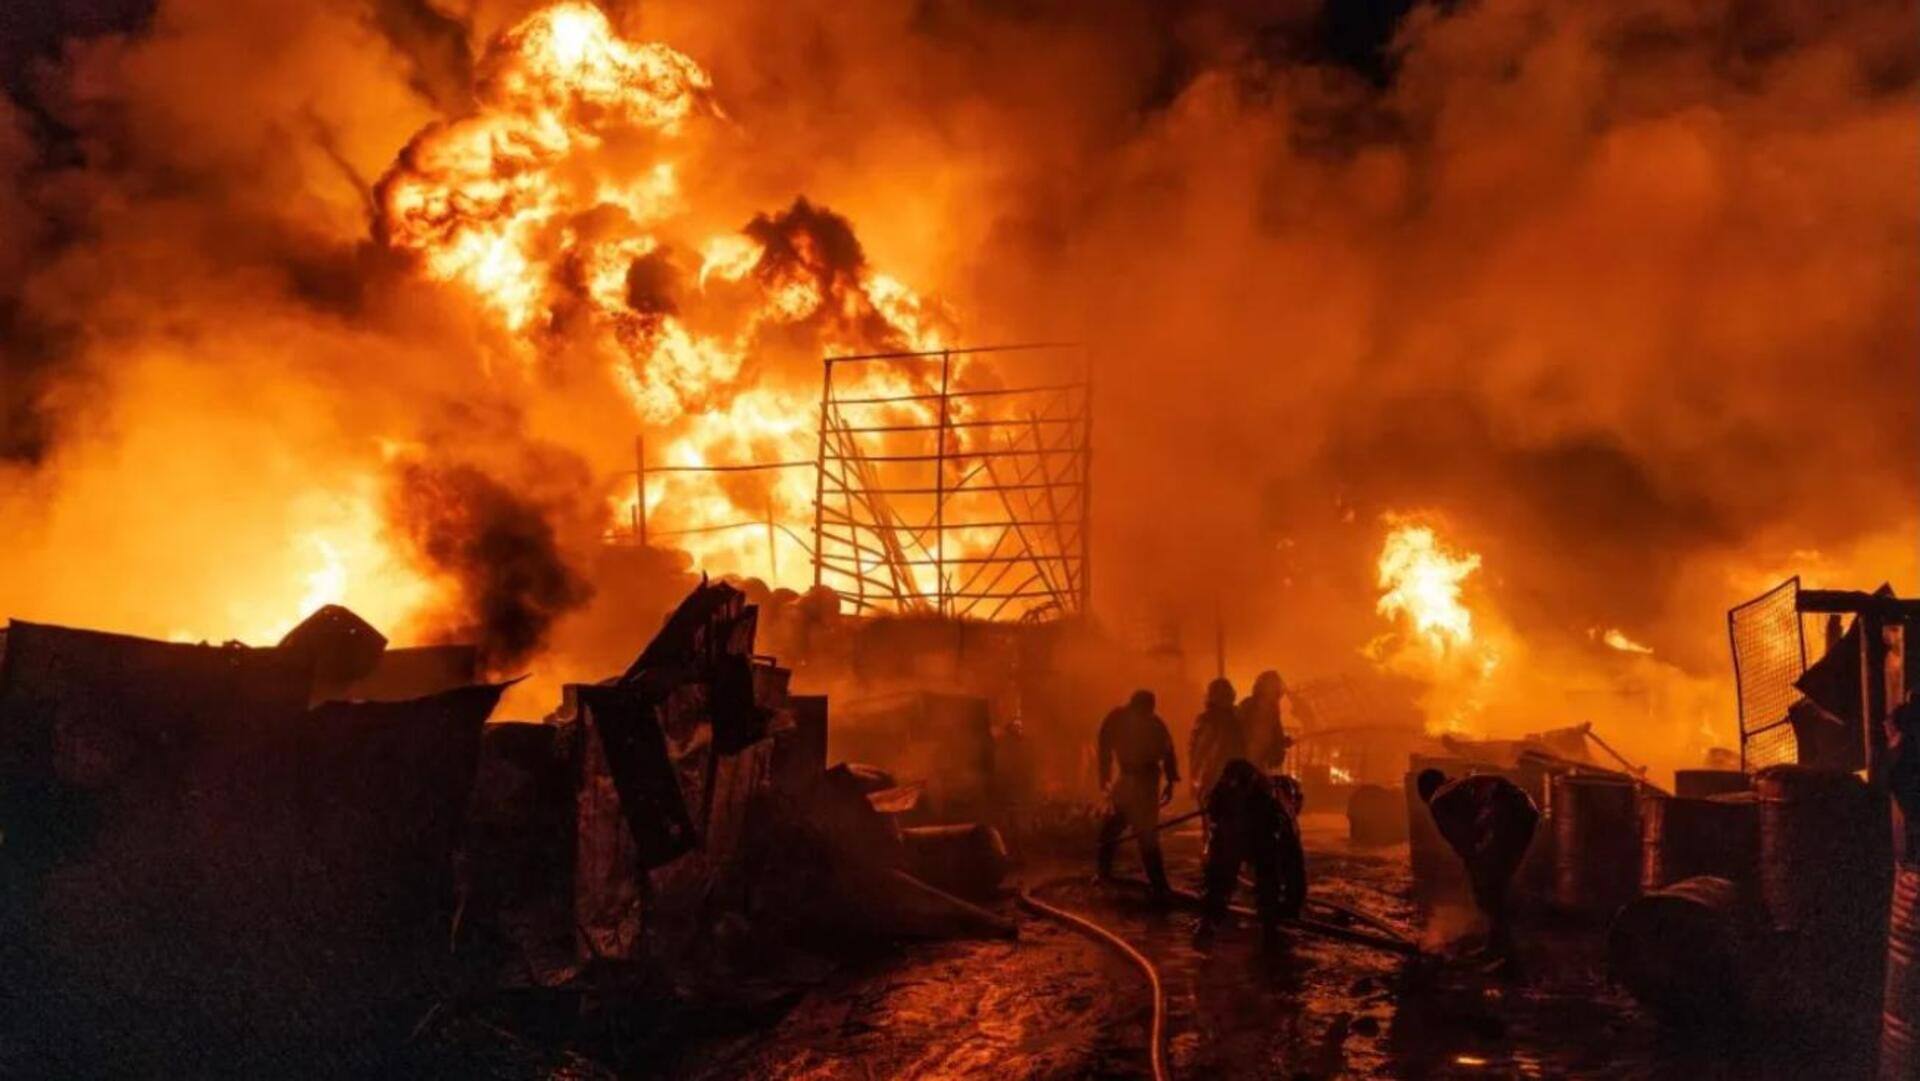 Gas explosion in Nairobi: 2 dead, over 222 injured